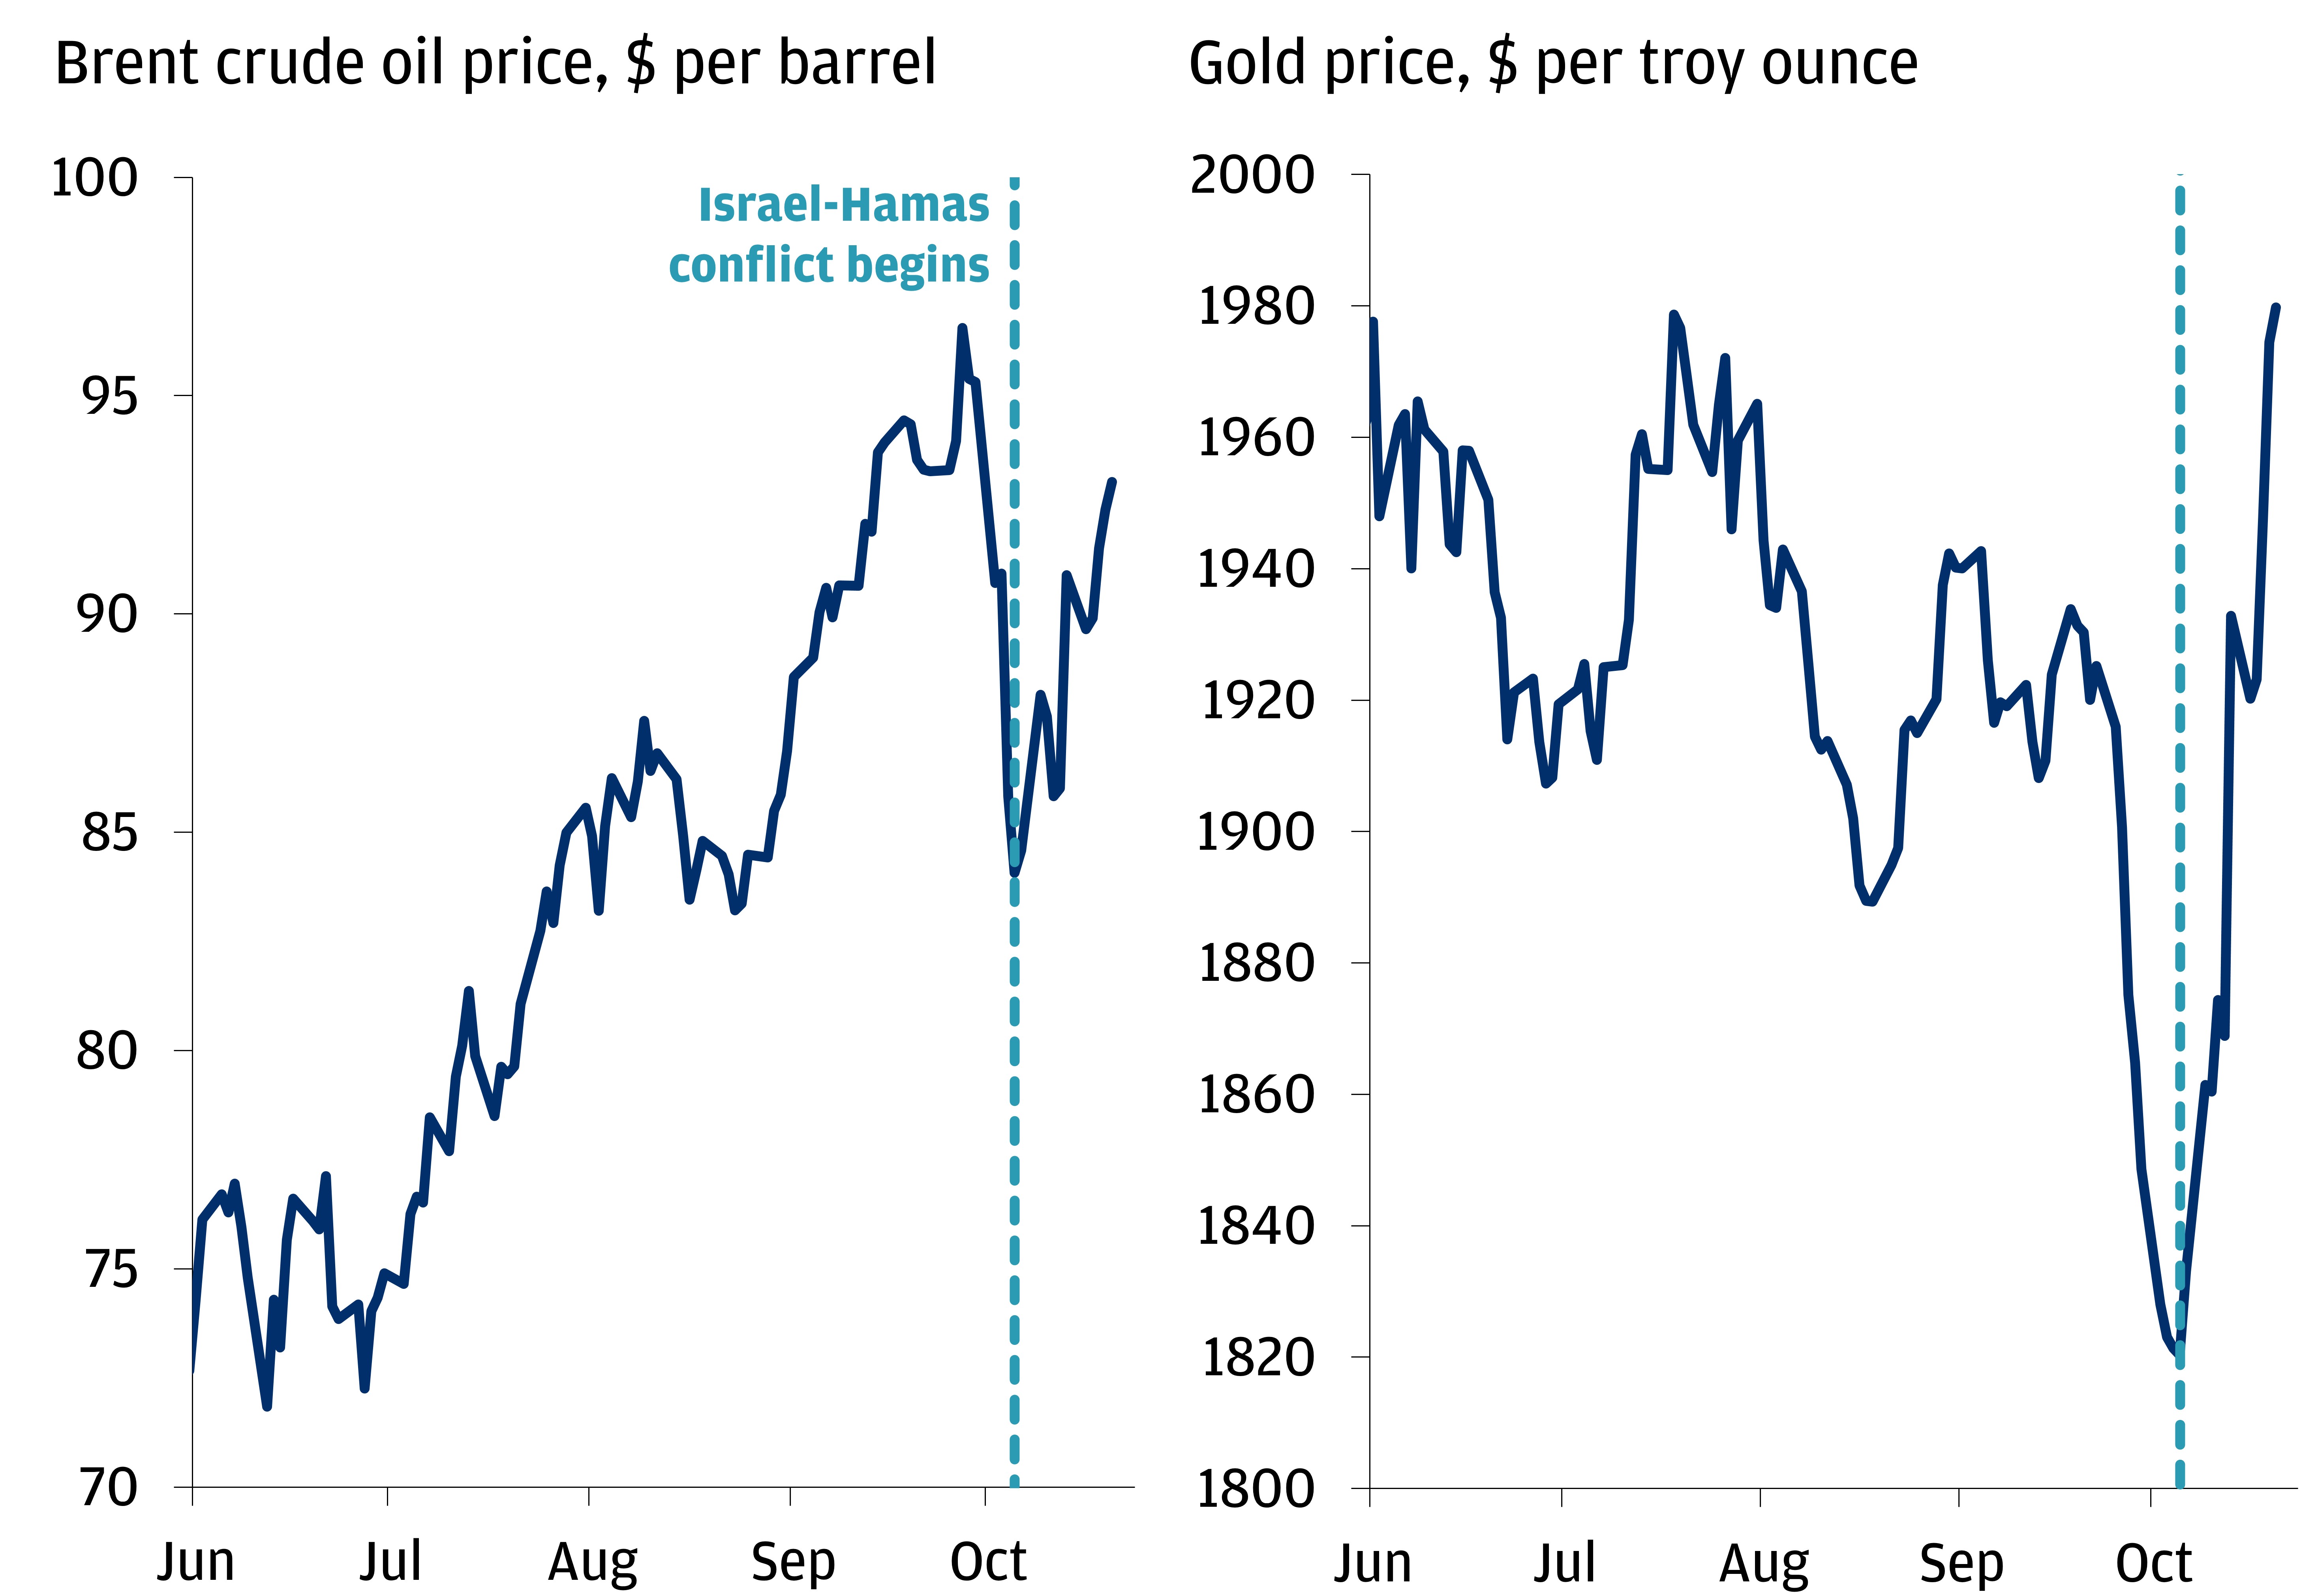 These line charts show the price of Brent crude oil on the left and Gold on the right. 